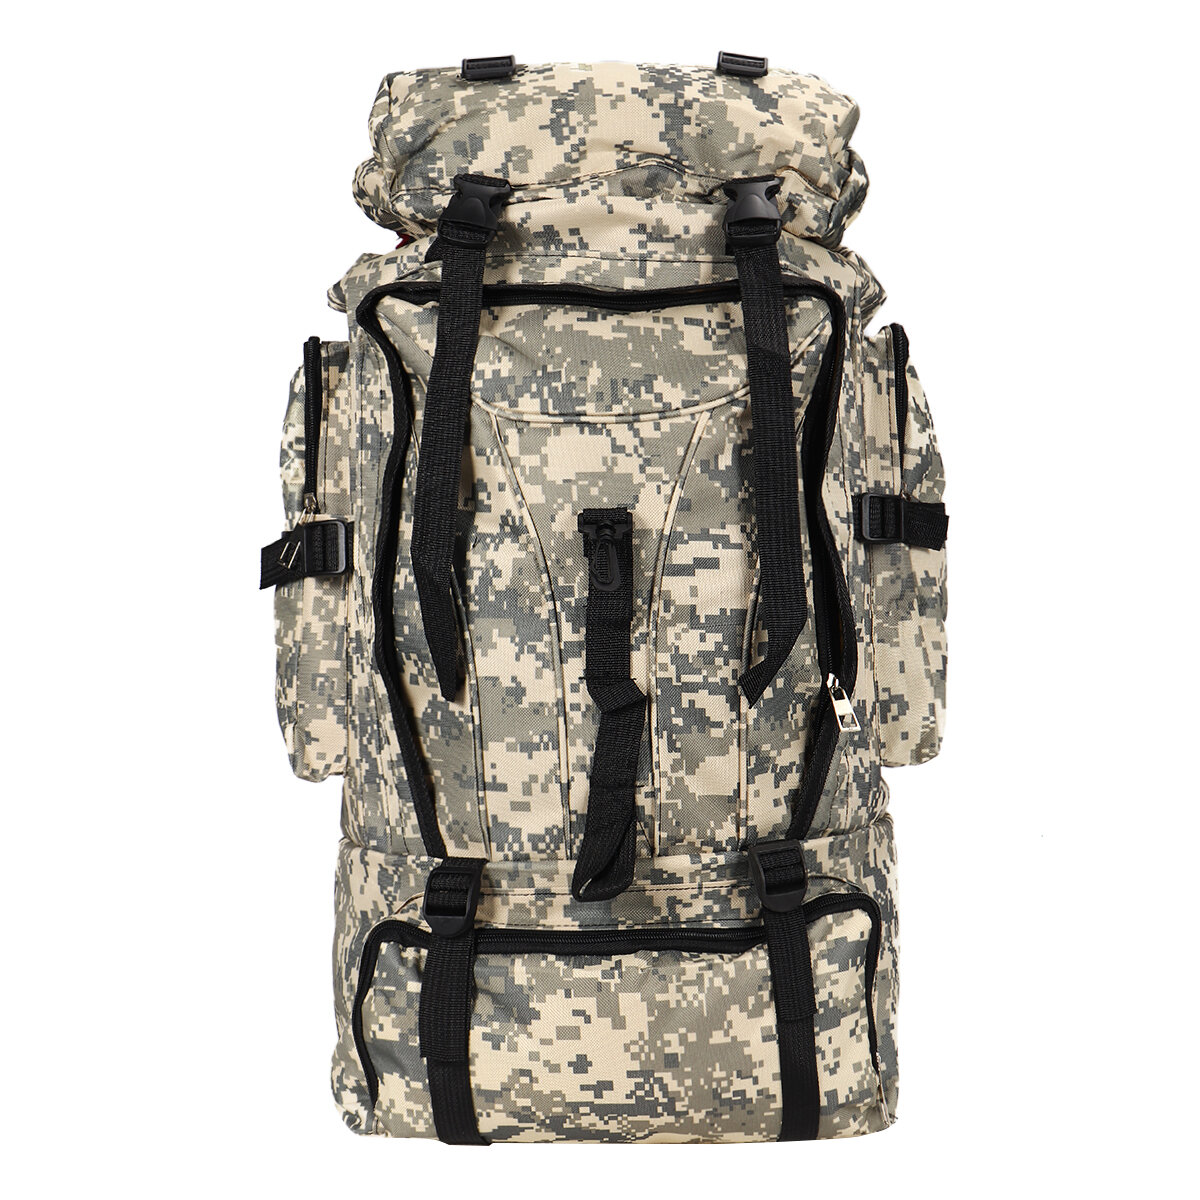 90L Outdoor Folding Bag Military Tactical Backpack Camping Climbing HIking Bag Luggage Bags